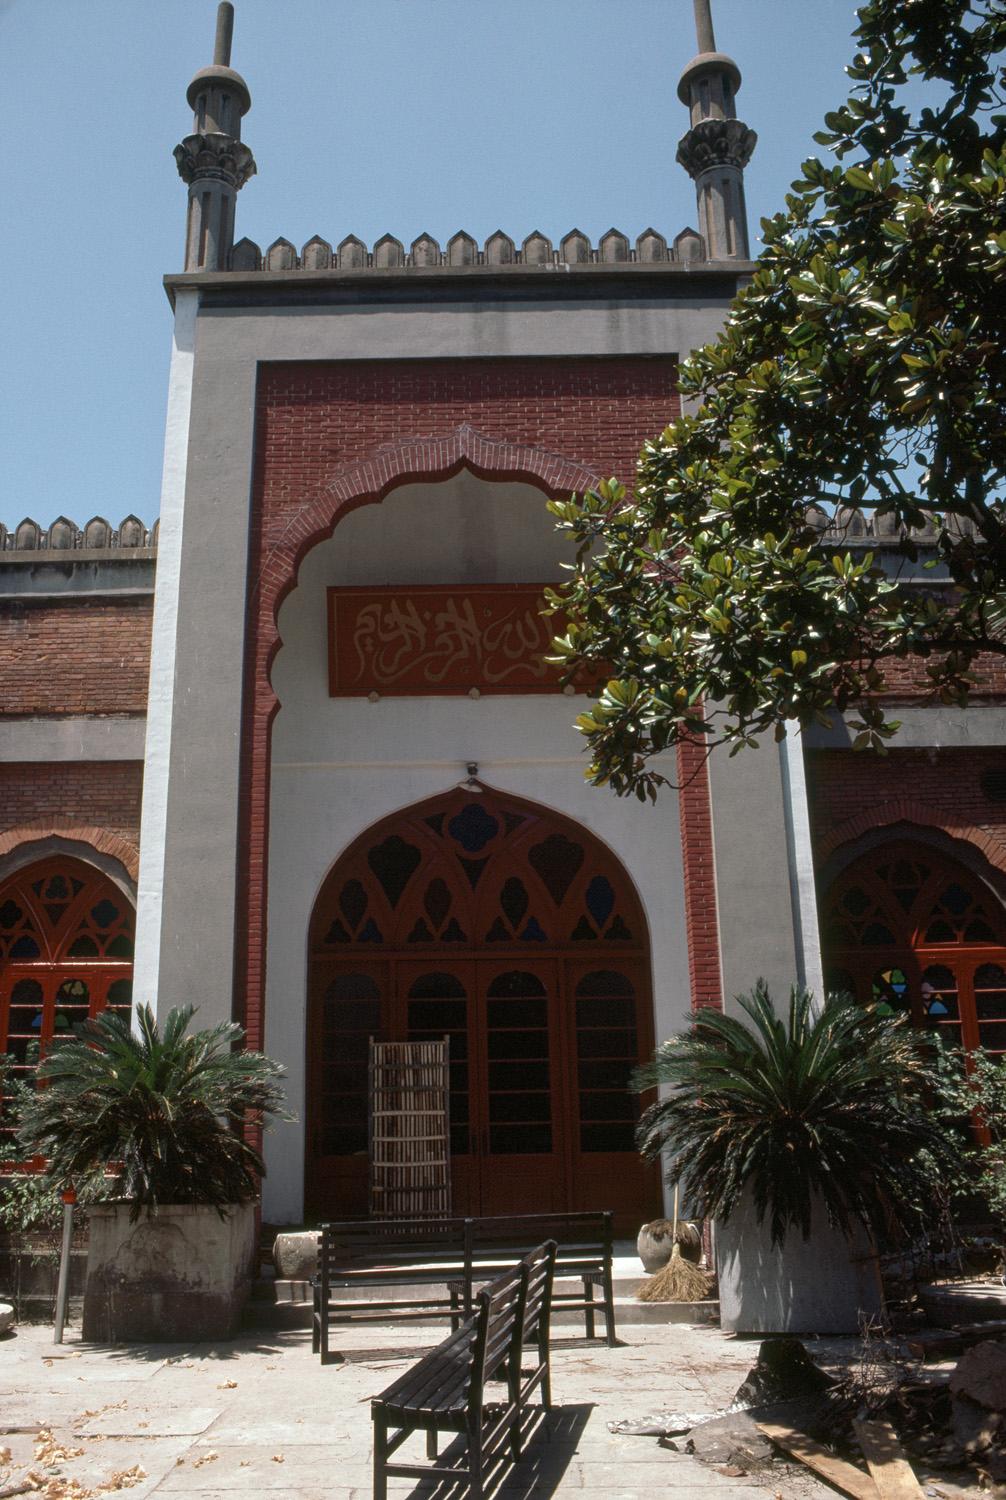 Multifoliated arched portal of the prayer hall extension